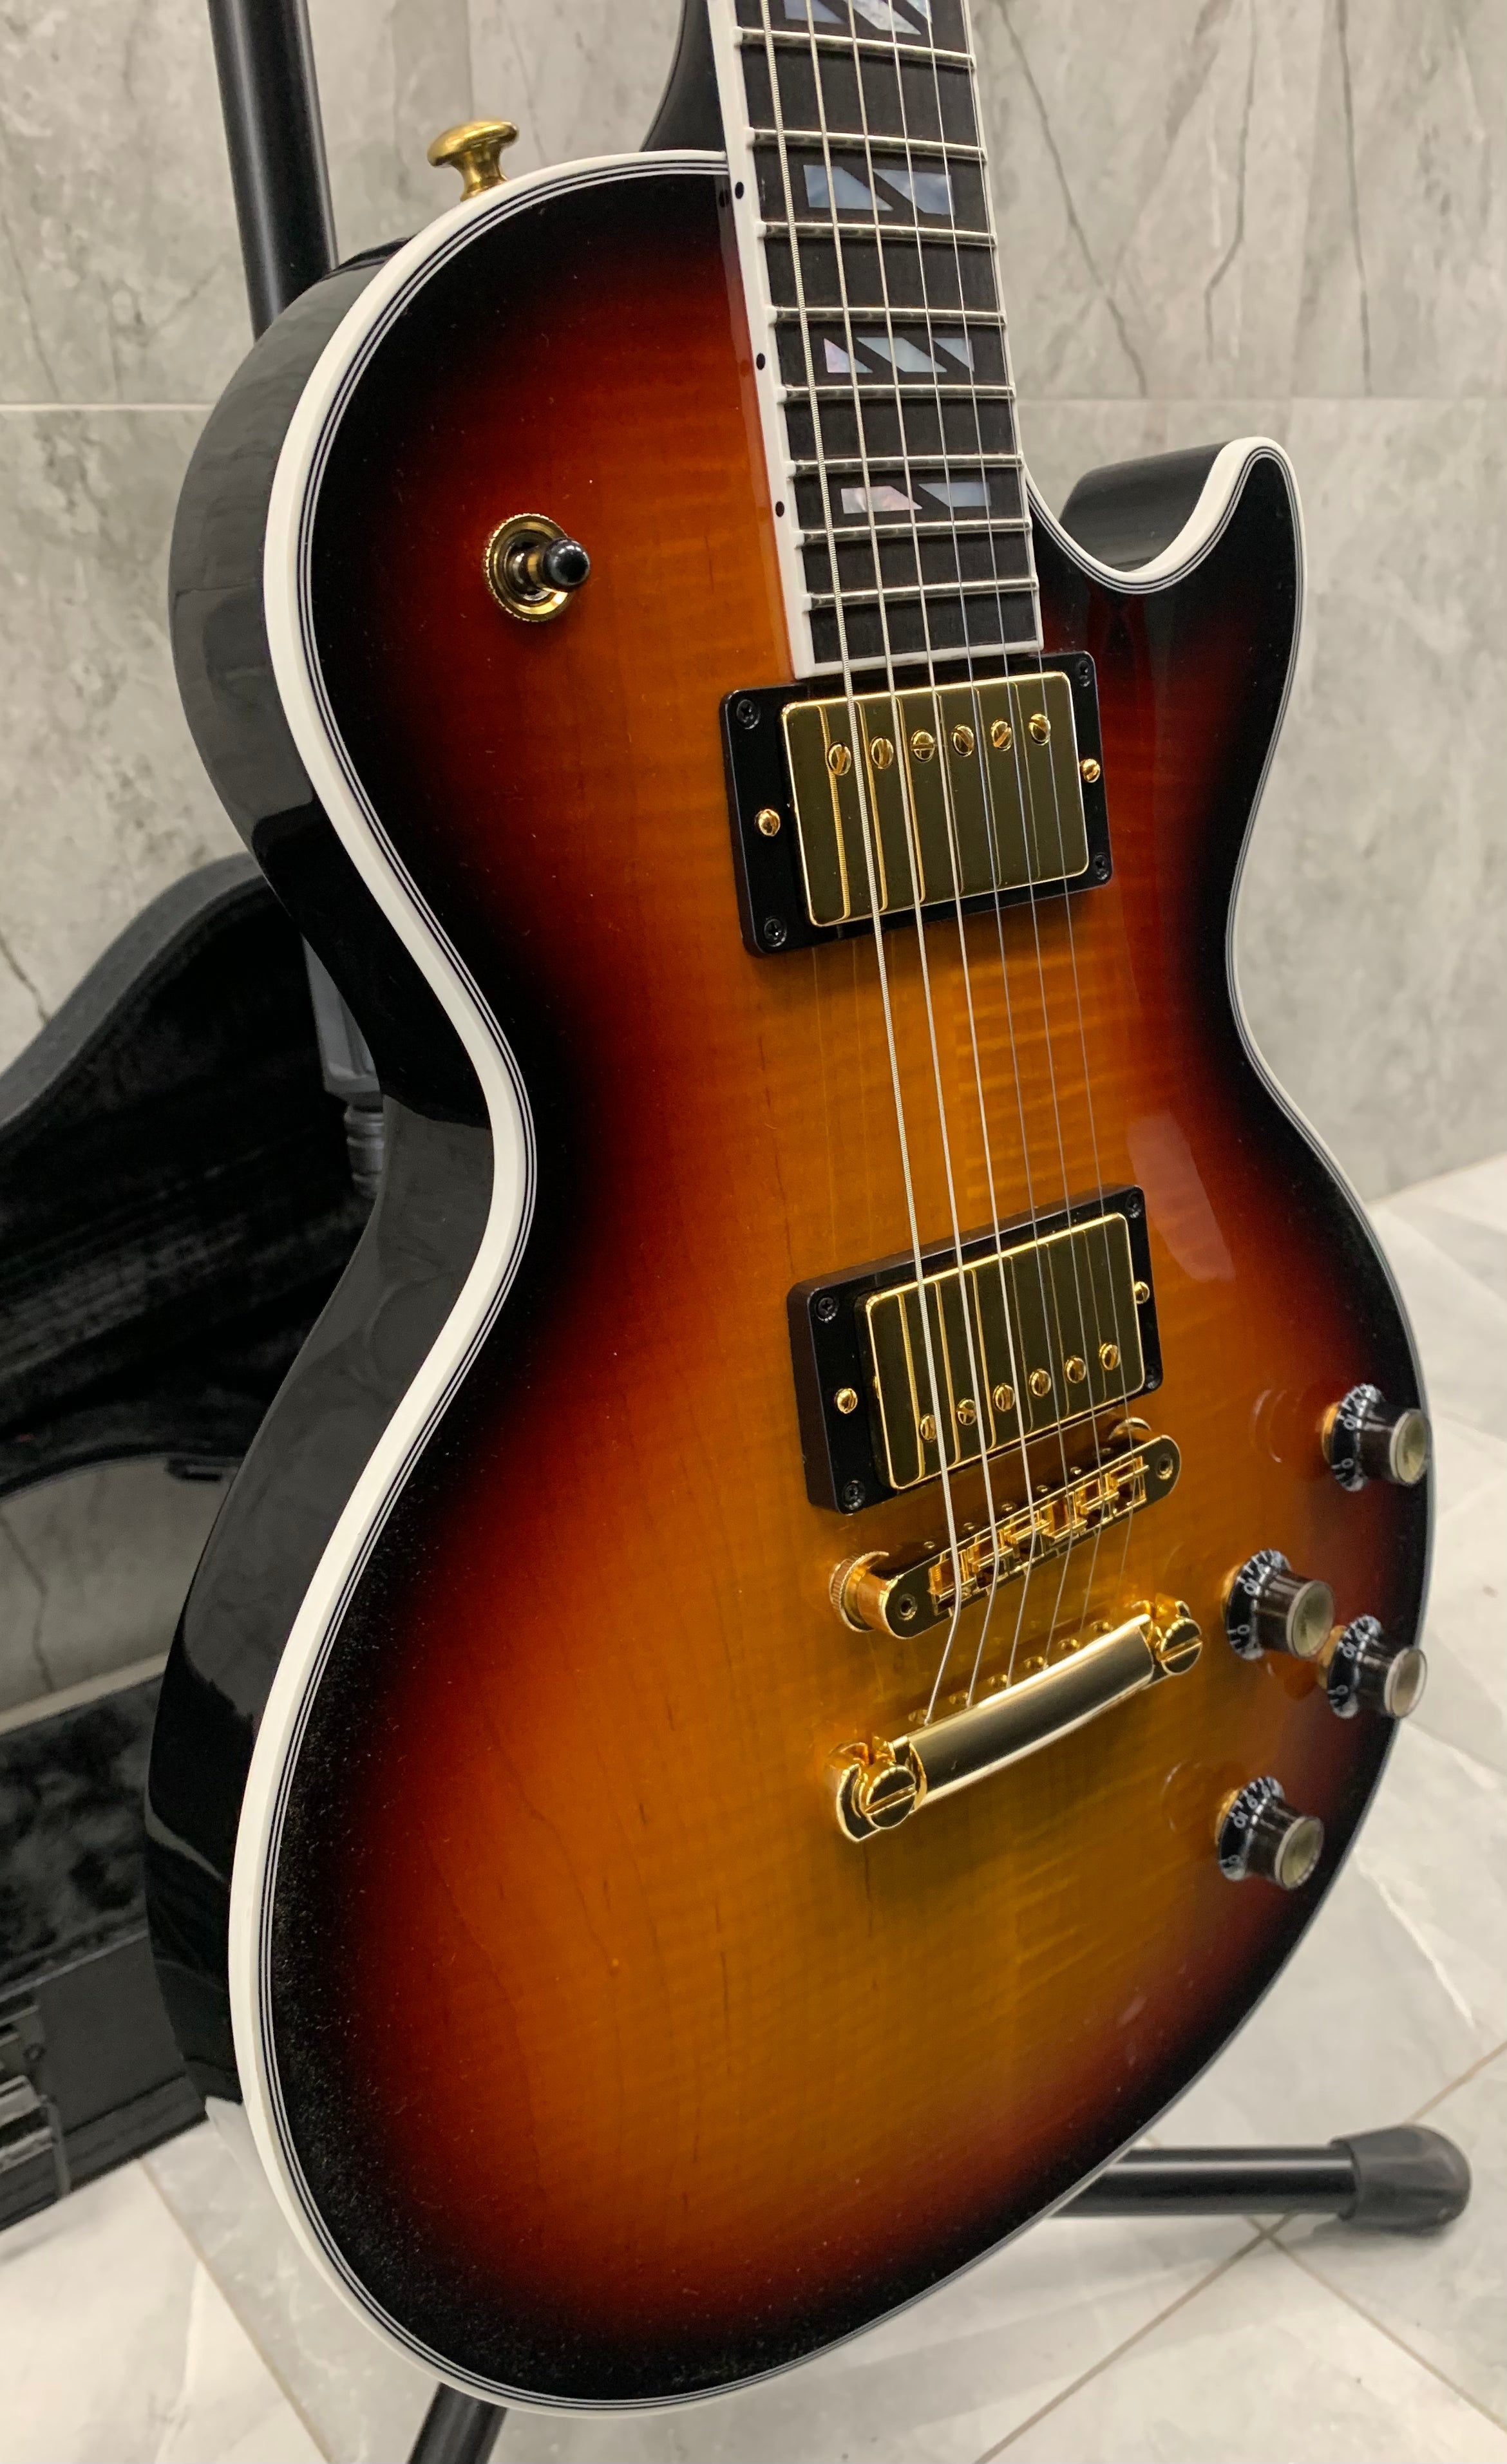 Gibson Les Paul Supreme - Fireburst LPSU00FIGH SERIAL NUMBER 200640180 - 7.9 LBS